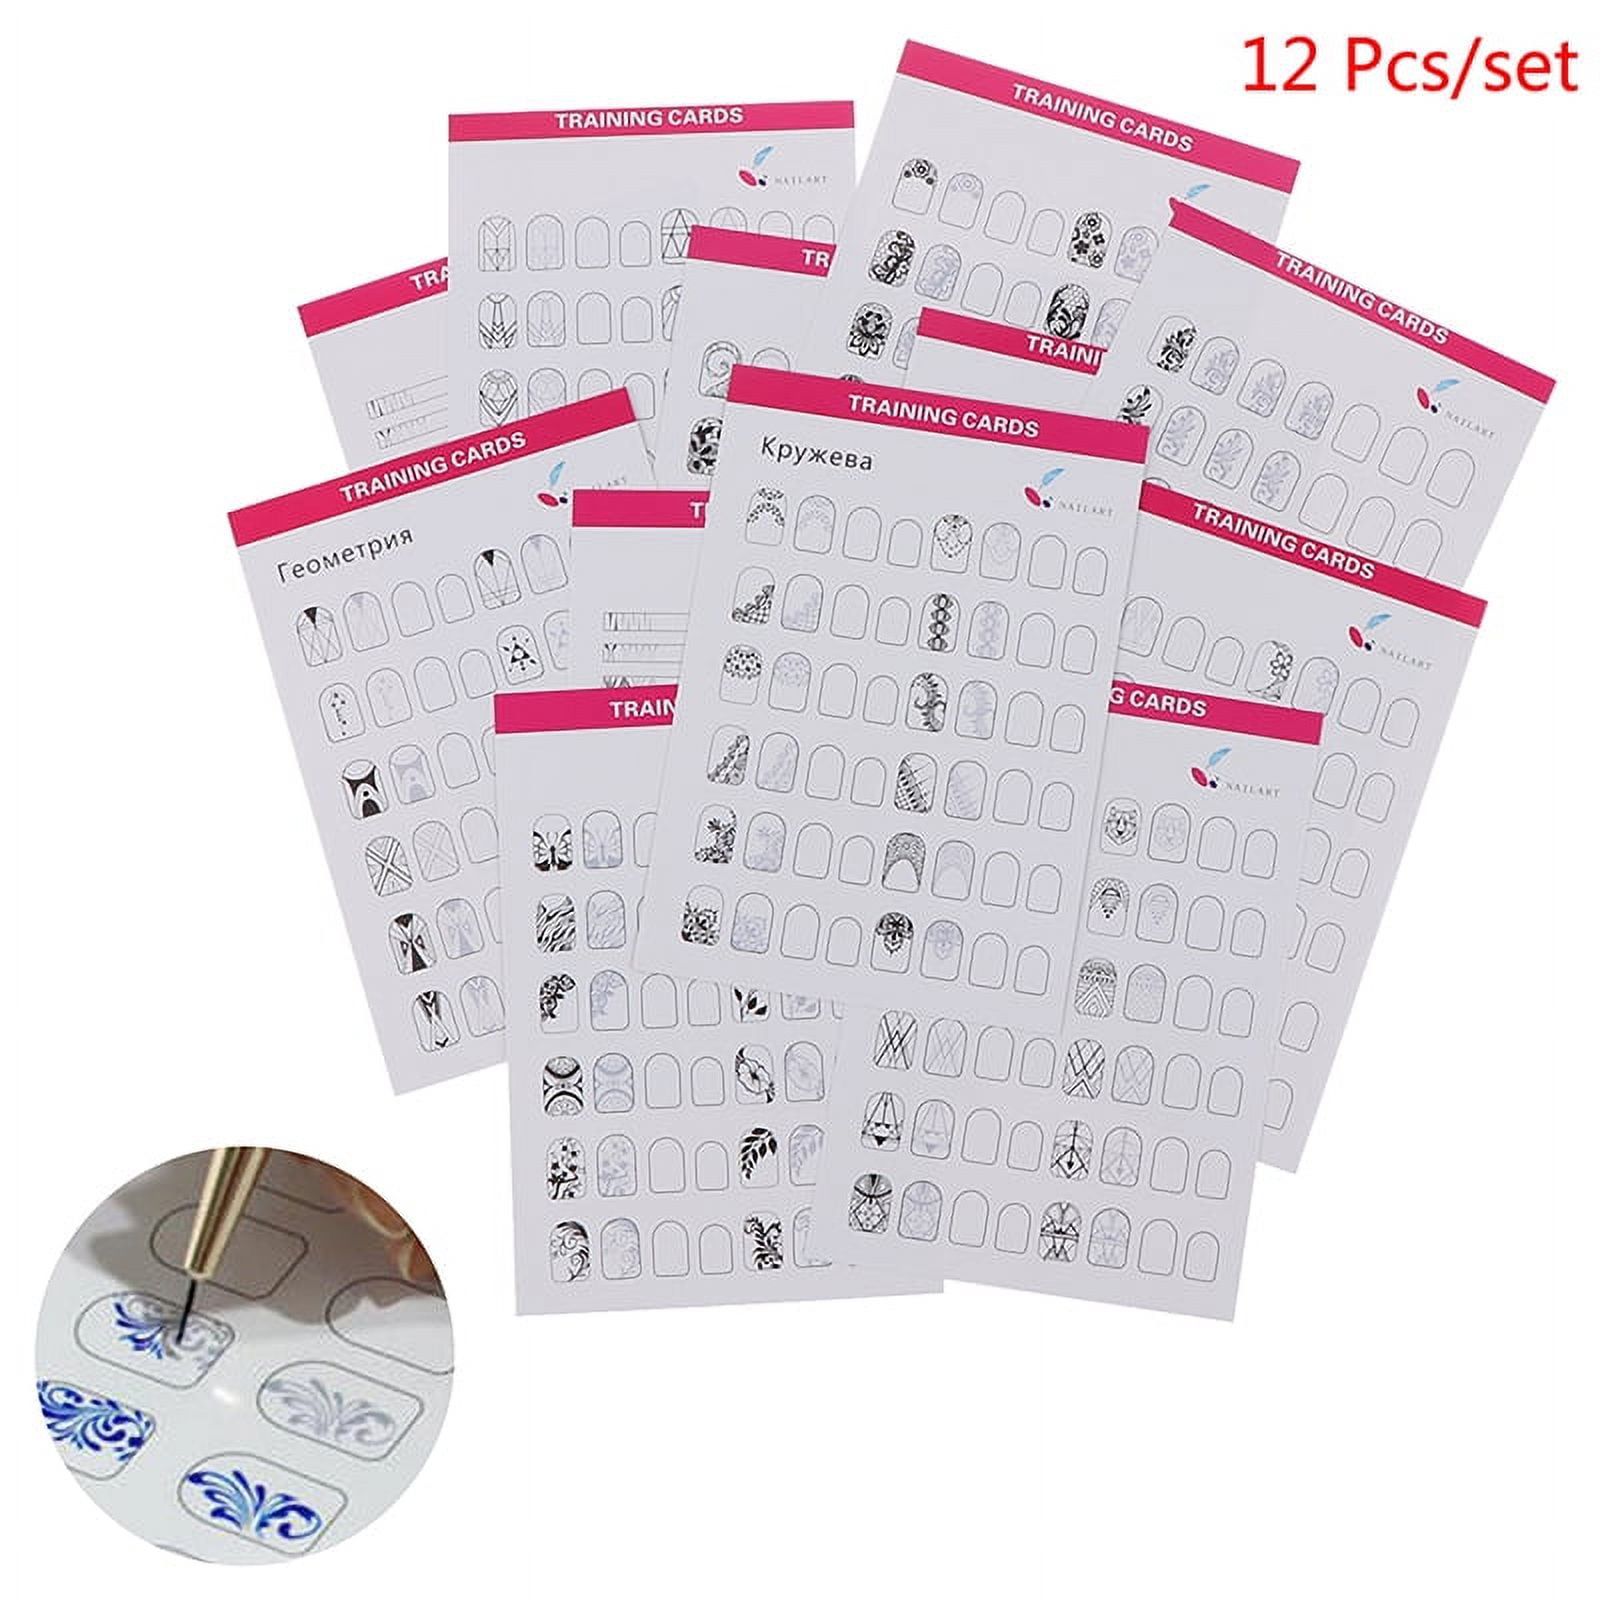 12pcs/set Nail Art Practice Paper Book Learn Template Painting Guide Nails  Tools